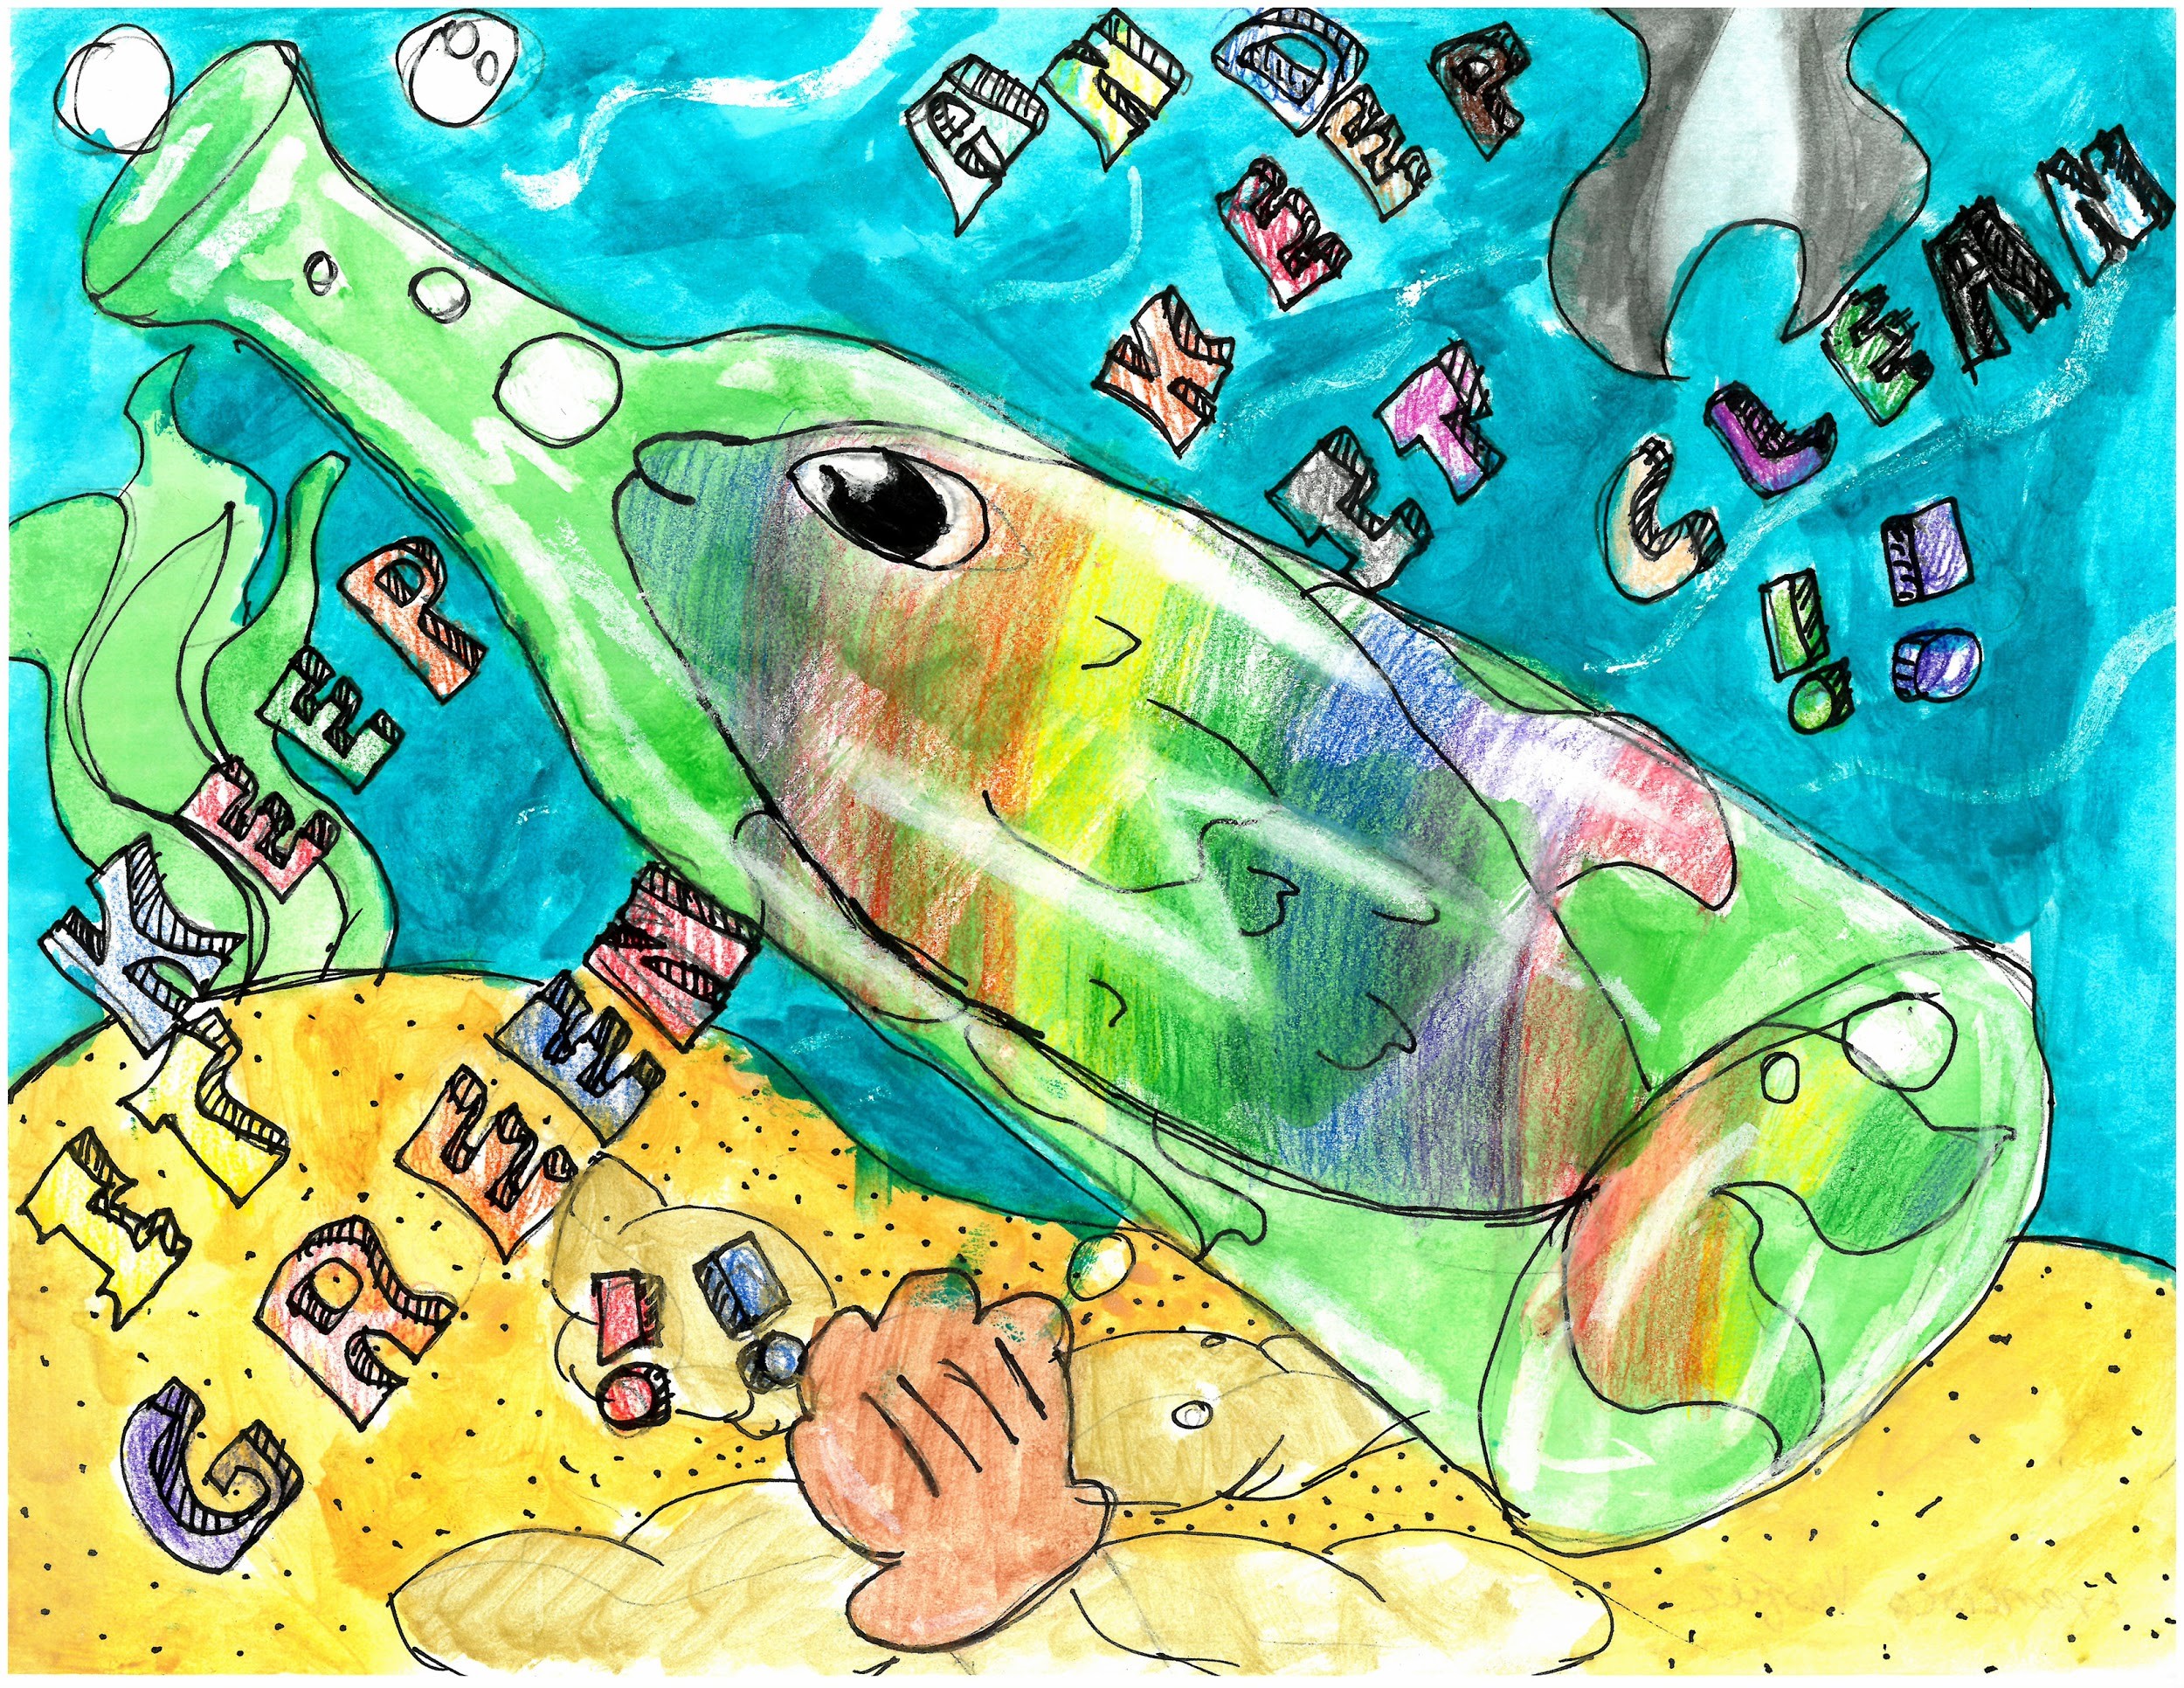 Text: Keep it green and keep it clean. Image: Child’s artwork depicting a fish stuck in a bottle that rests on the sandy ocean floor.